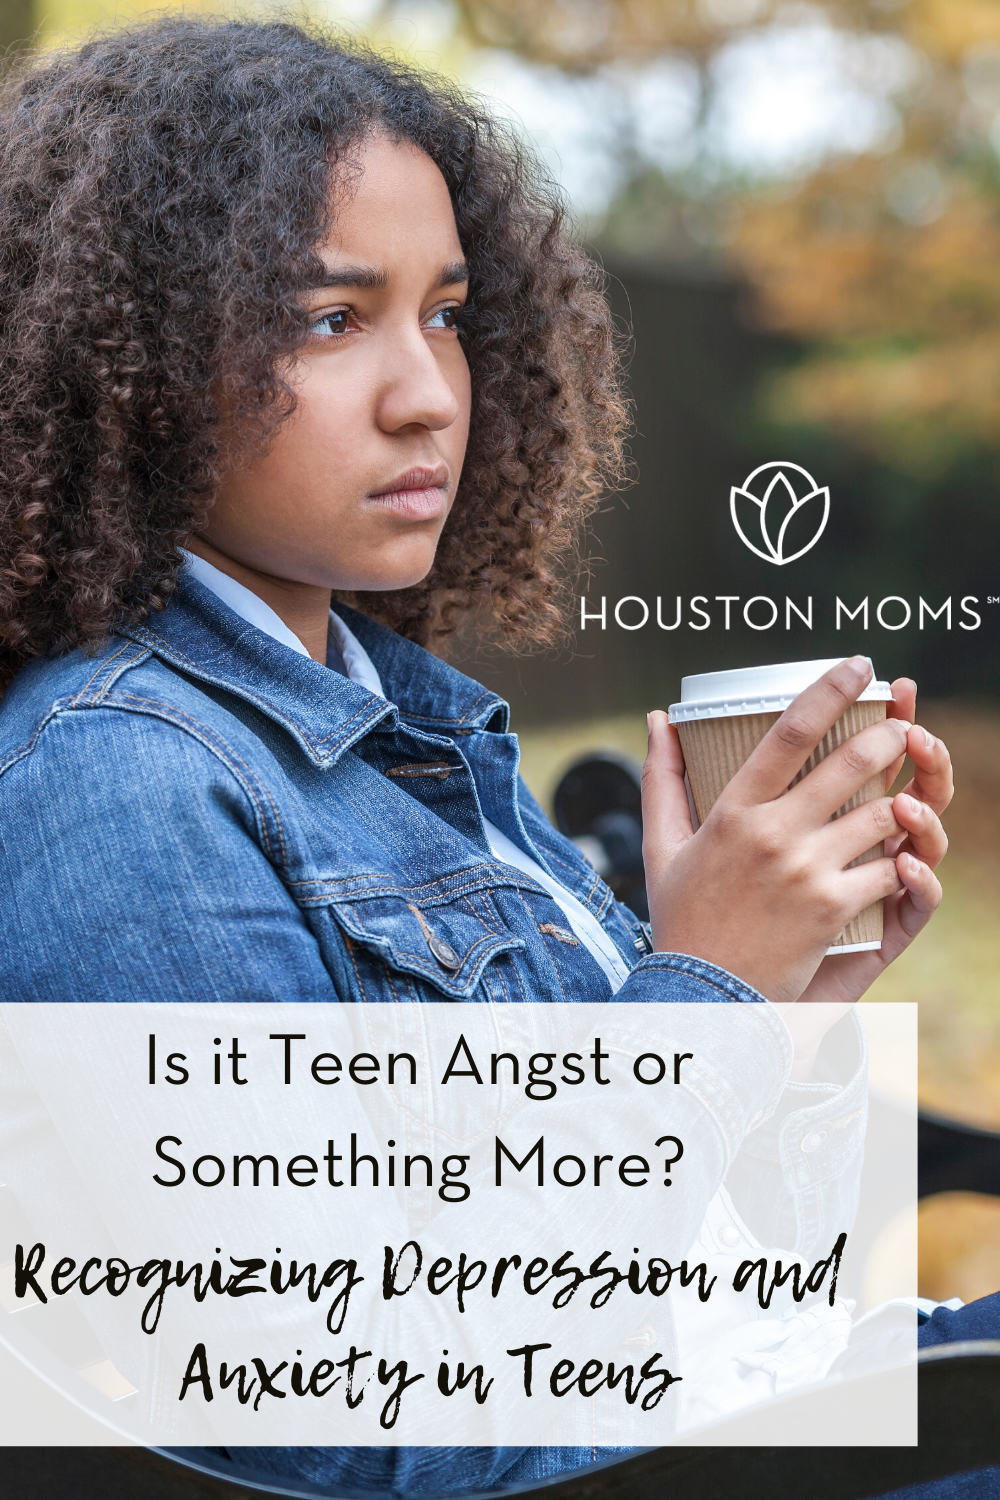 Houston Moms "Is it Teen Angst or Something More? Recognizing Depression and Anxiety in Teens" #houstonmoms #houstonmomsblog #momsaroundhouston